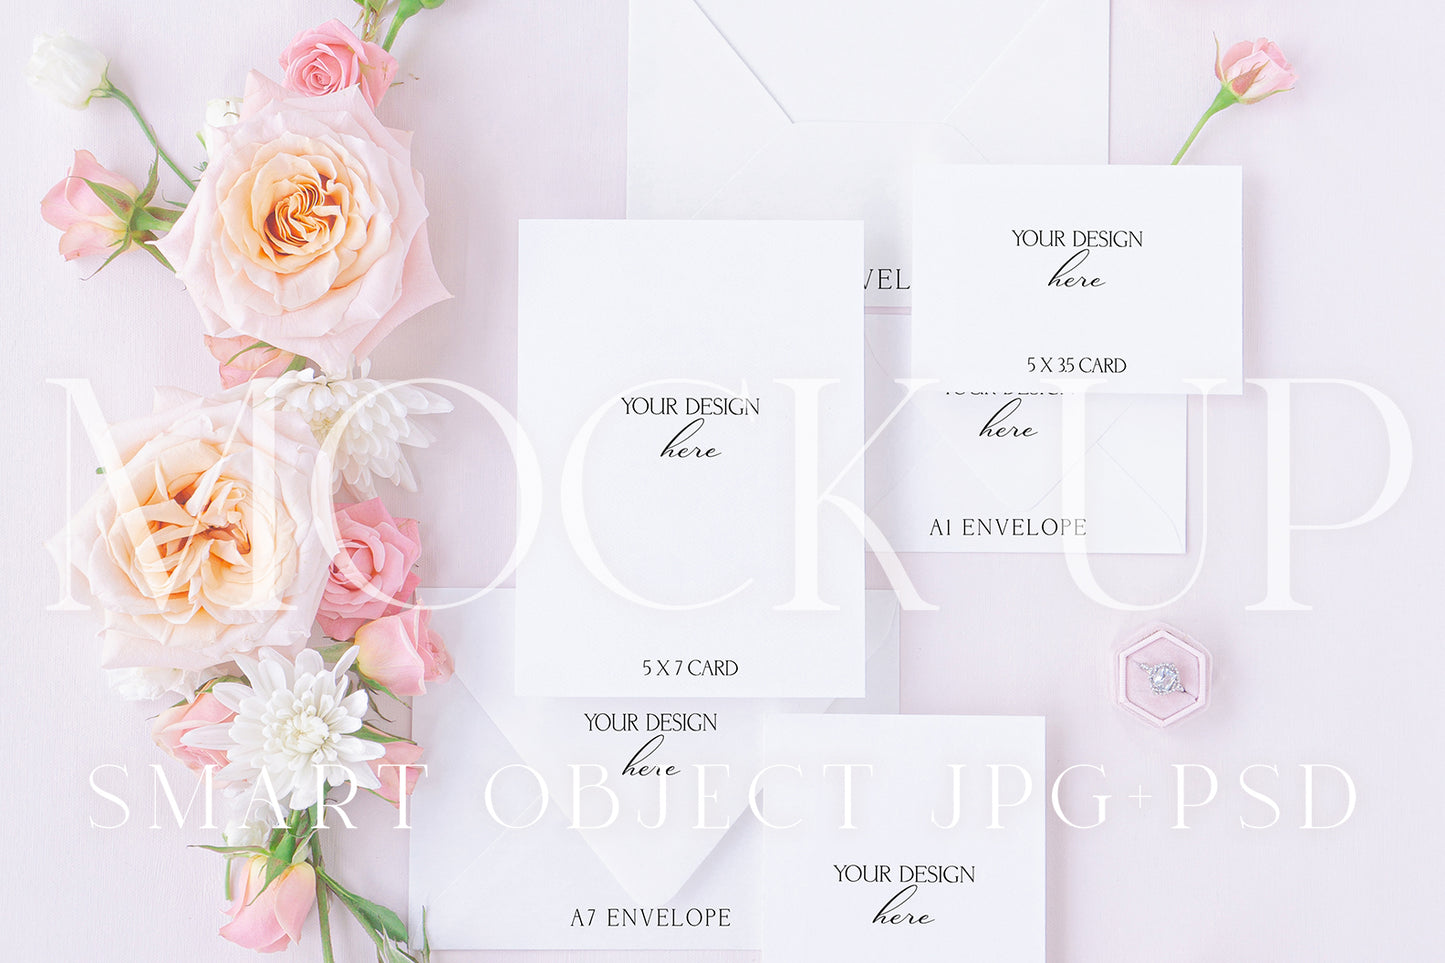 Invitation suite mock up, floral stationery mock up with pink and ivory roses {Tenderness 08}